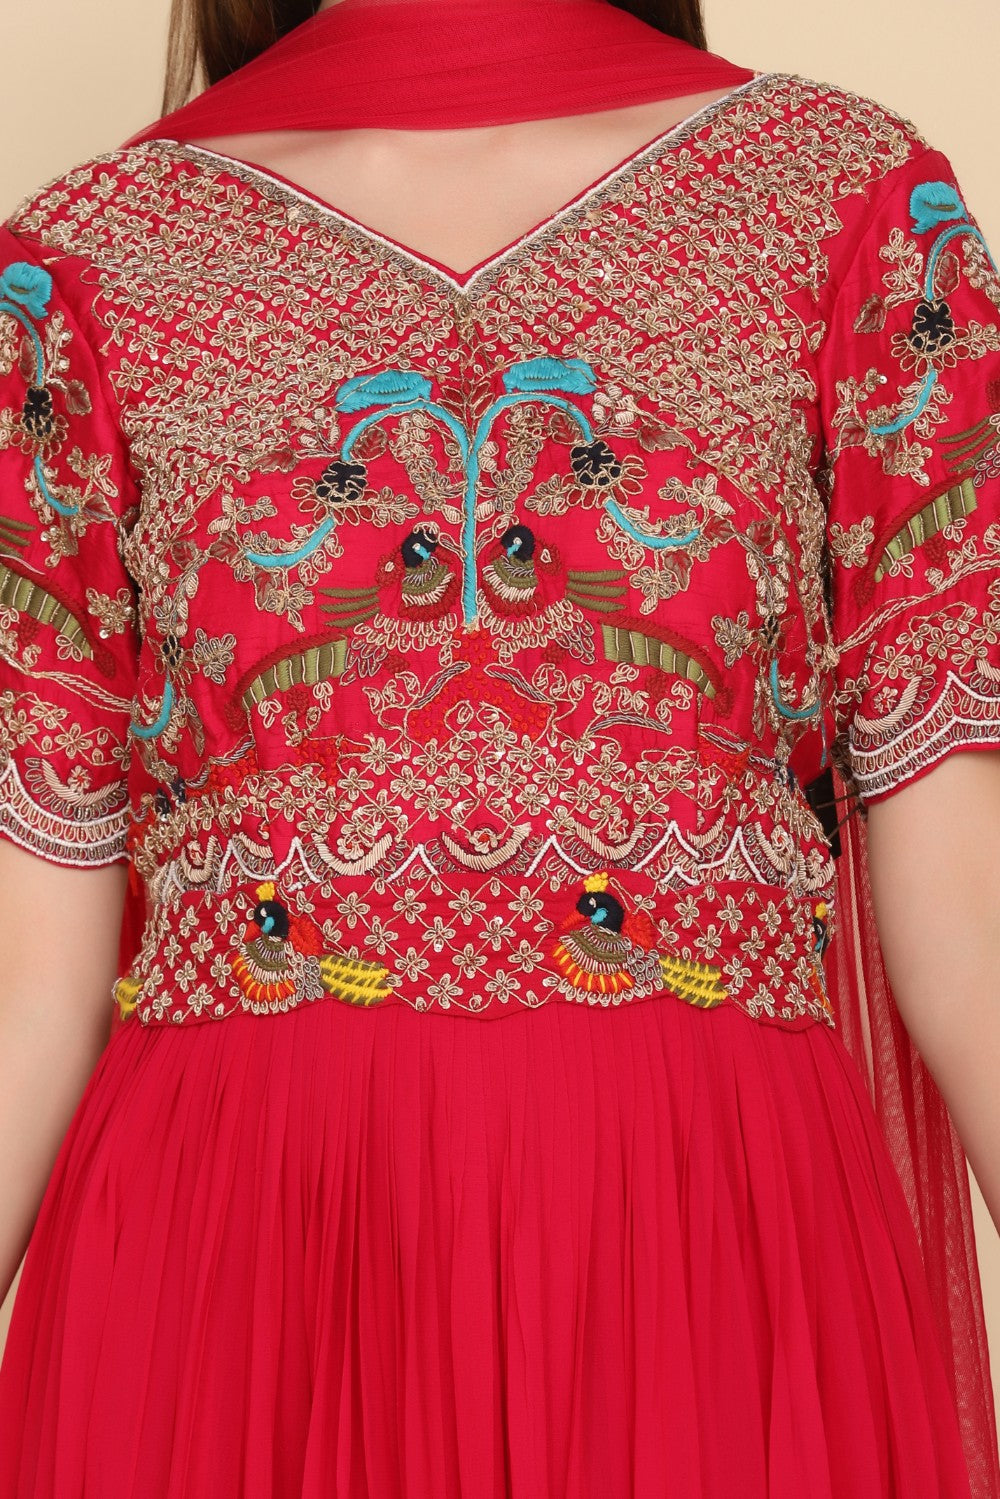 closer look of work of floral embroidered dress